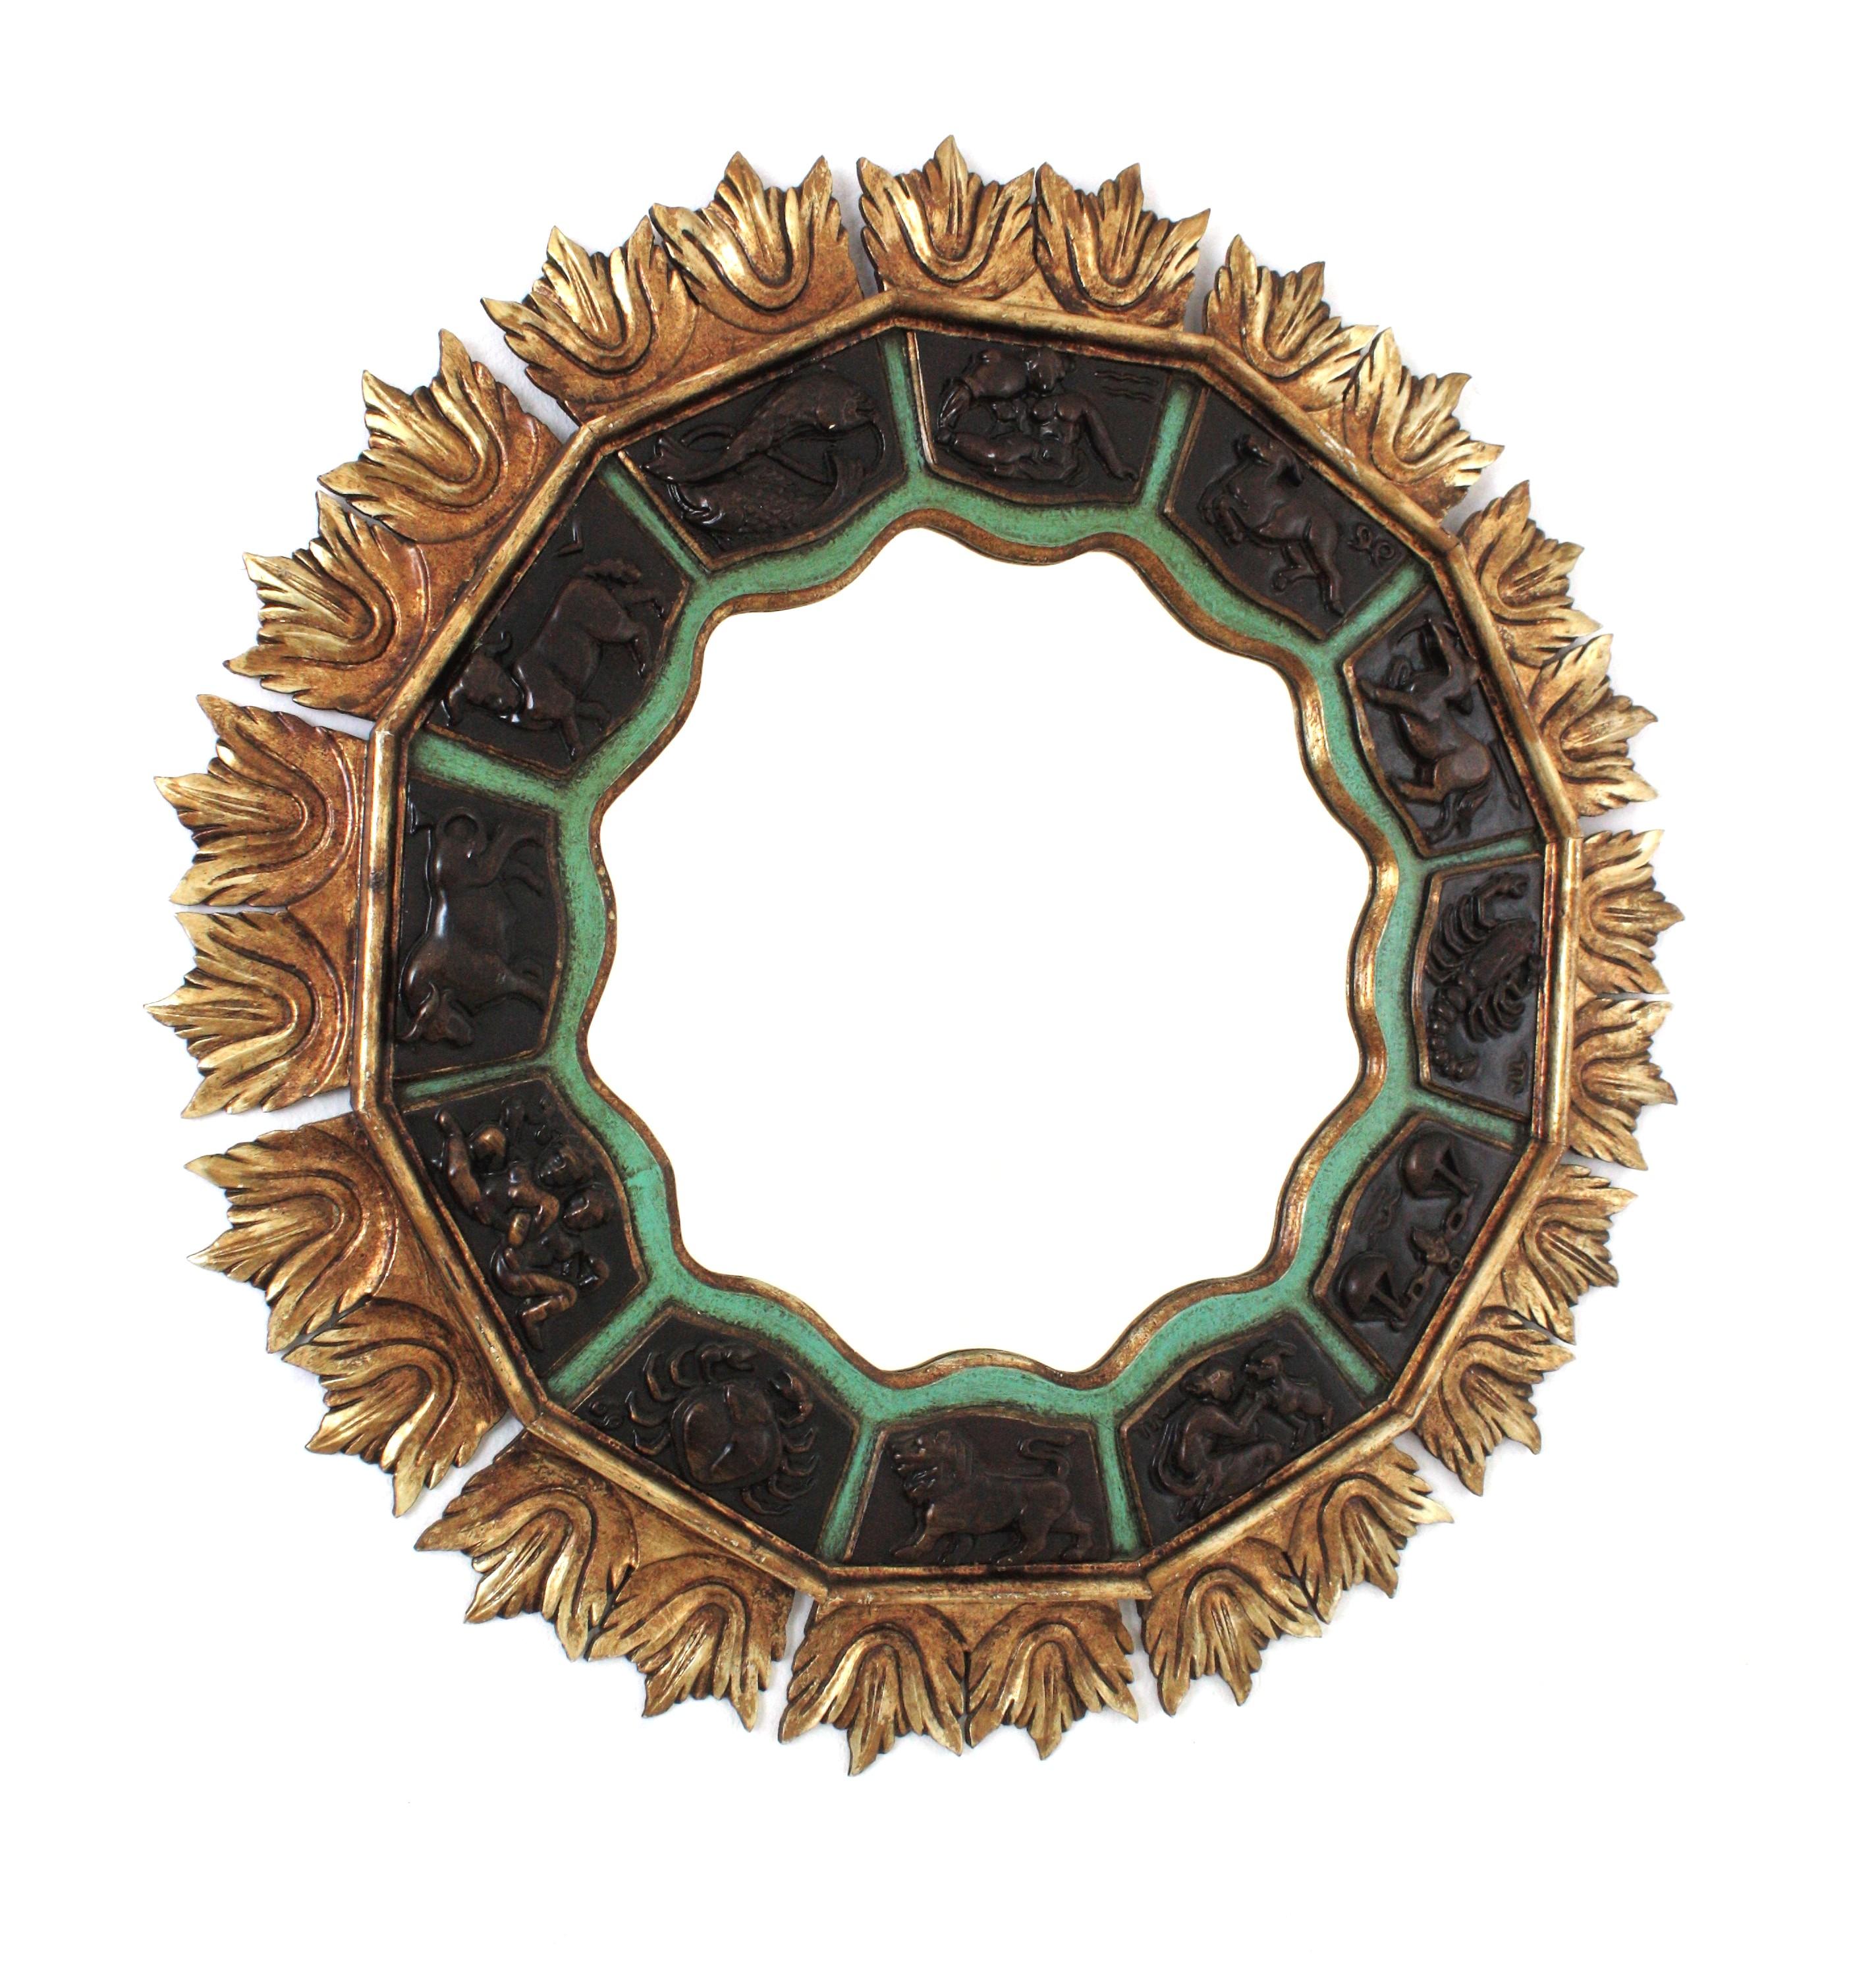 Large Midcentury Zodiac Mirror / Sunburst Mirror (35,43 in )
One of a kind polychrome wood zodiac XL sunburst mirror, Spain, 1950s
Large giltwood sunburst mirror featuring 12 carved horoscope signs around the frame. 
An scalloped gold leaf gilded